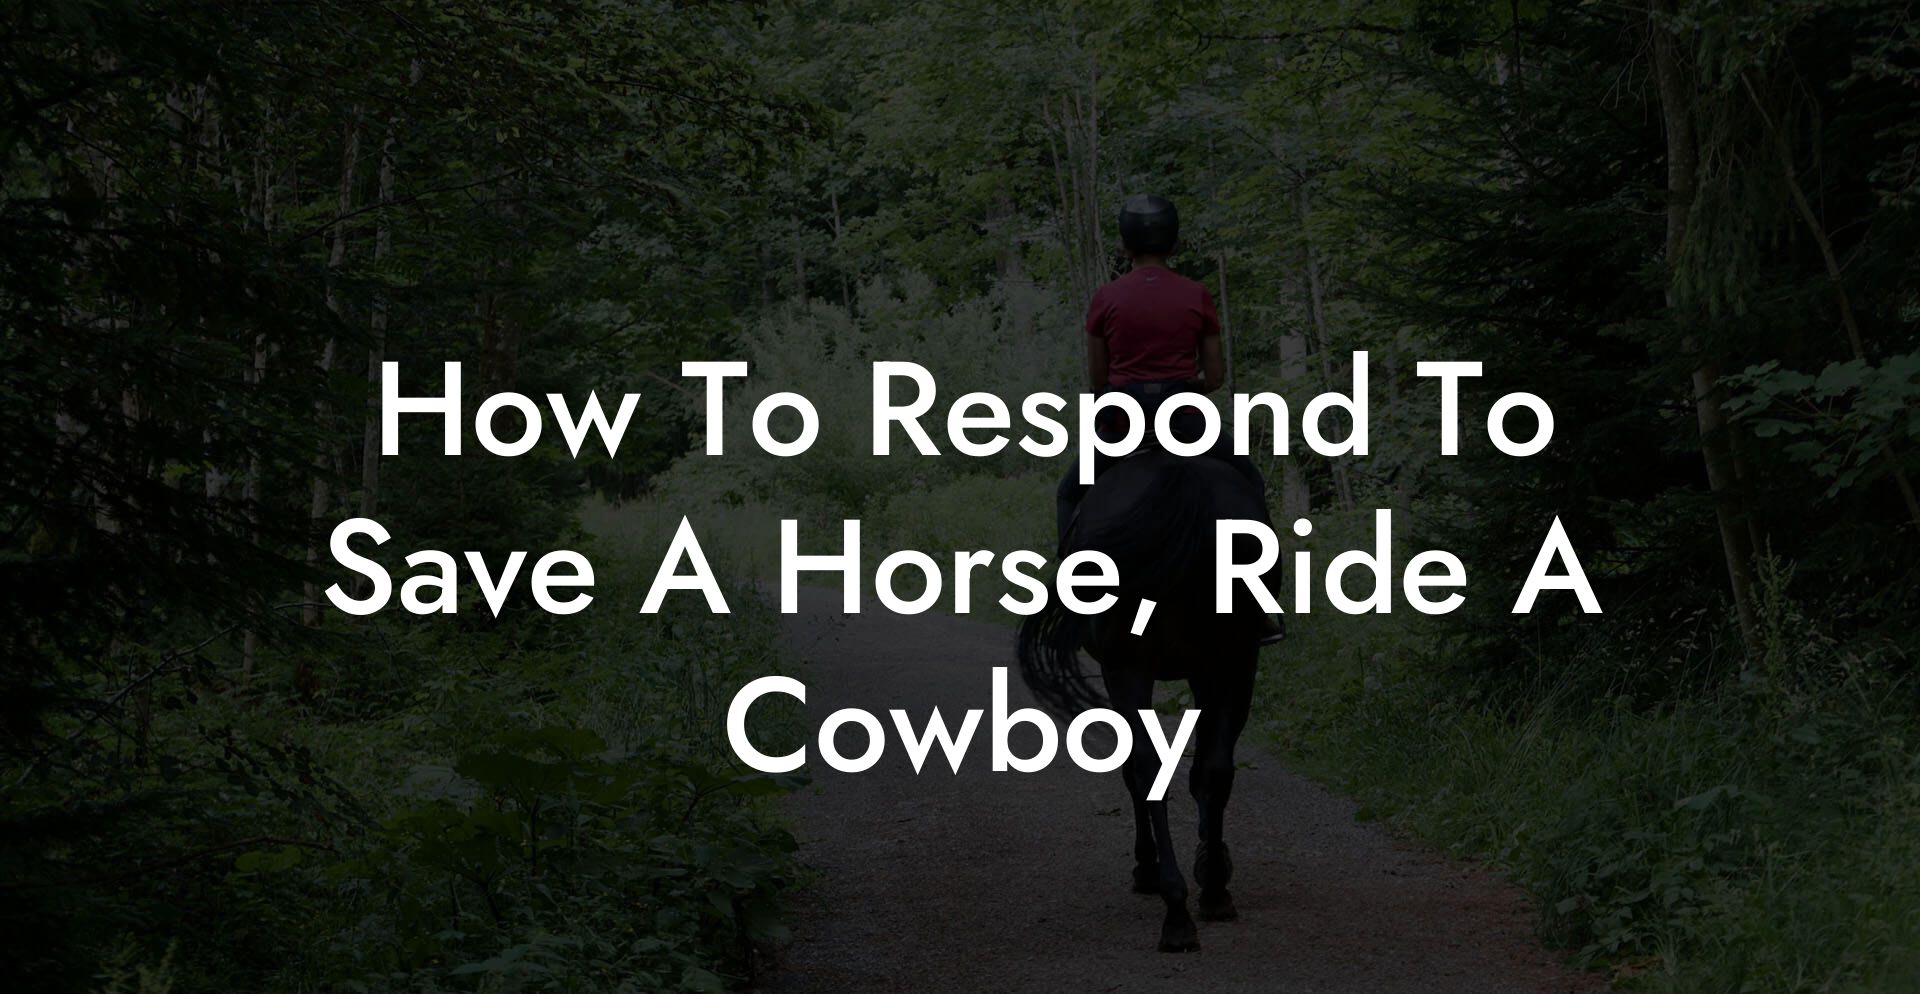 How To Respond To Save A Horse, Ride A Cowboy